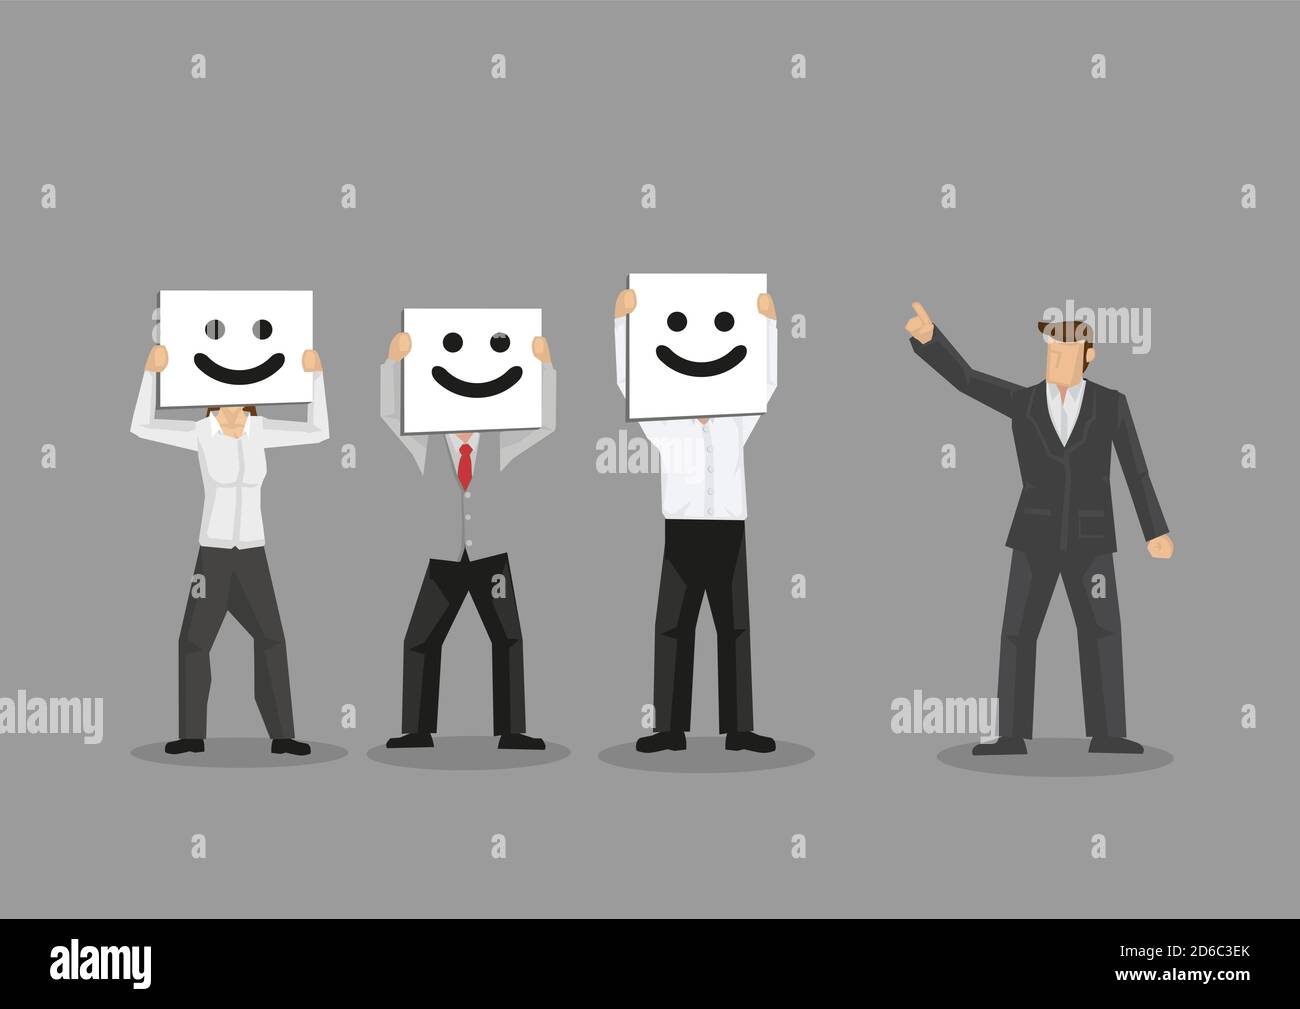 Employees hide behind smiling face mask when boss is around. Vector illustration for on putting a false front at work concept isolated on grey backgro Stock Vector